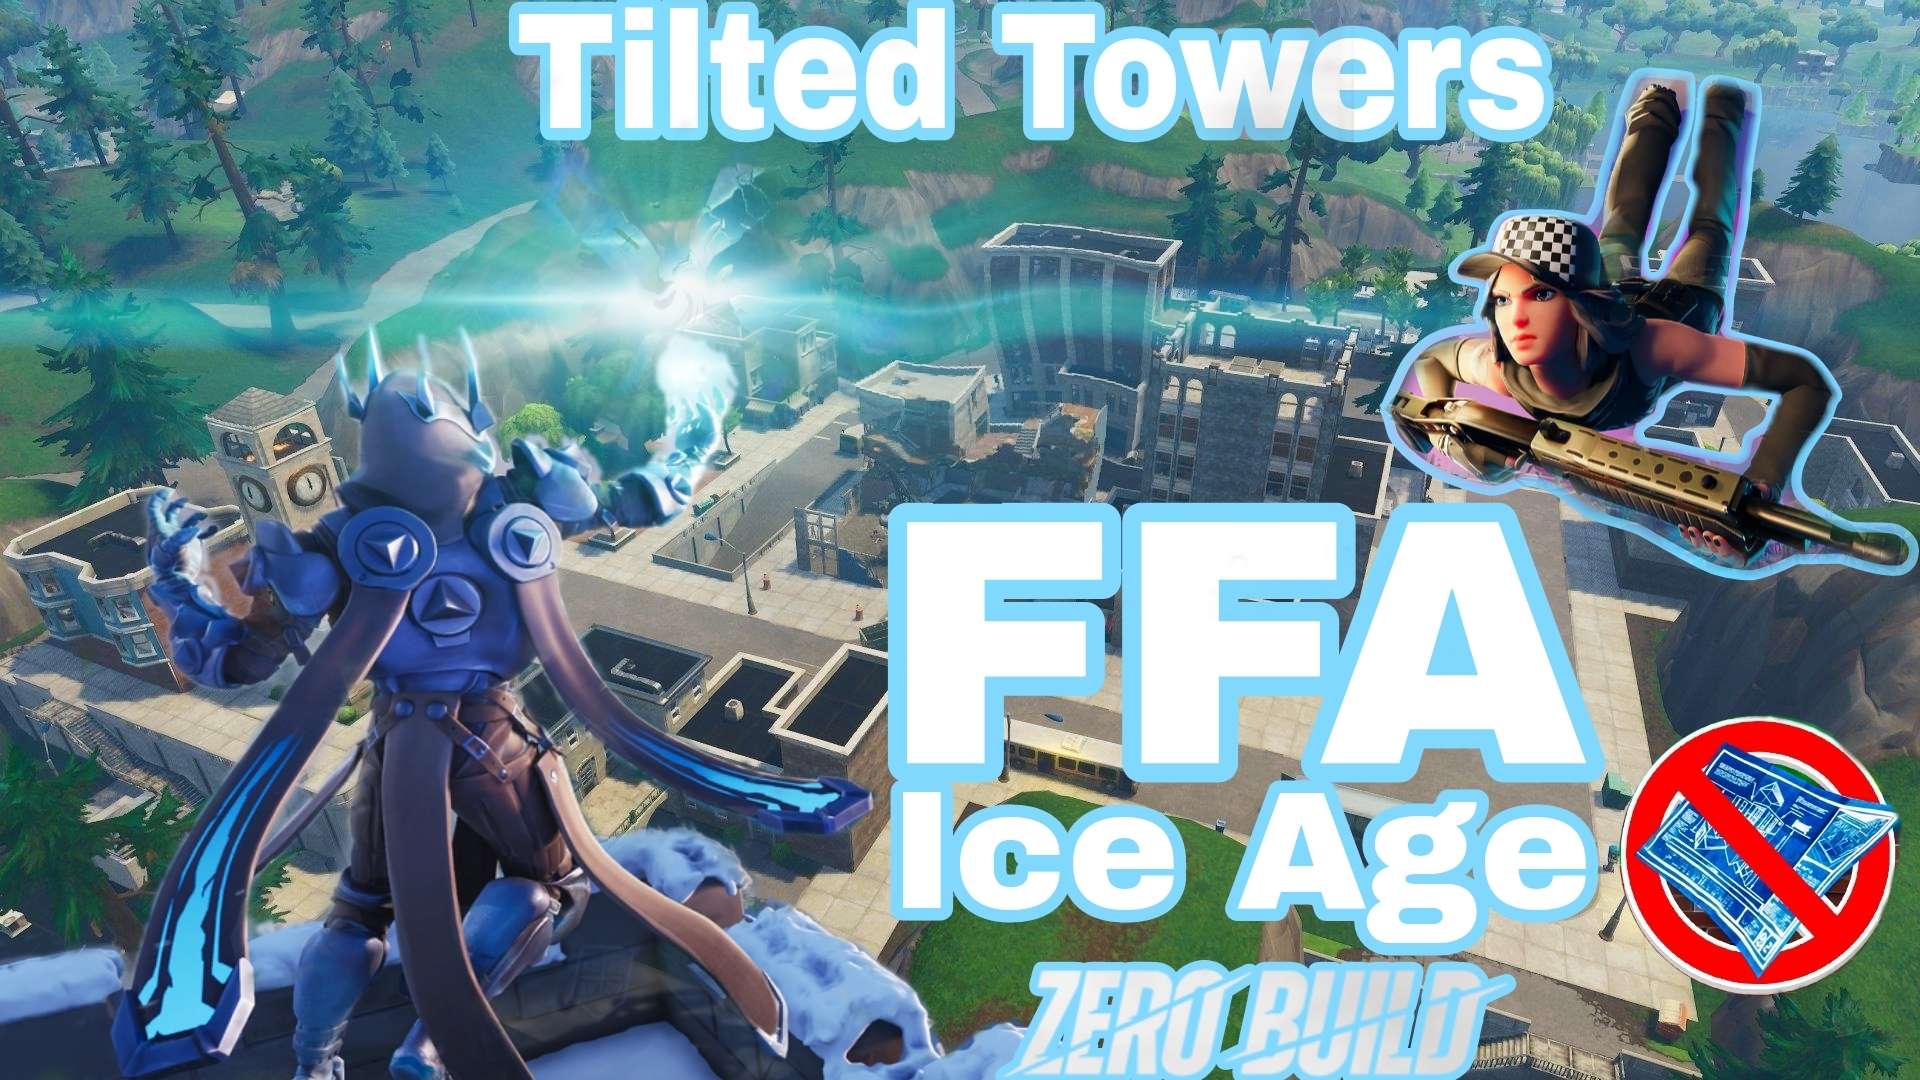 Tilted Towers FFA Zero Build Ice Age